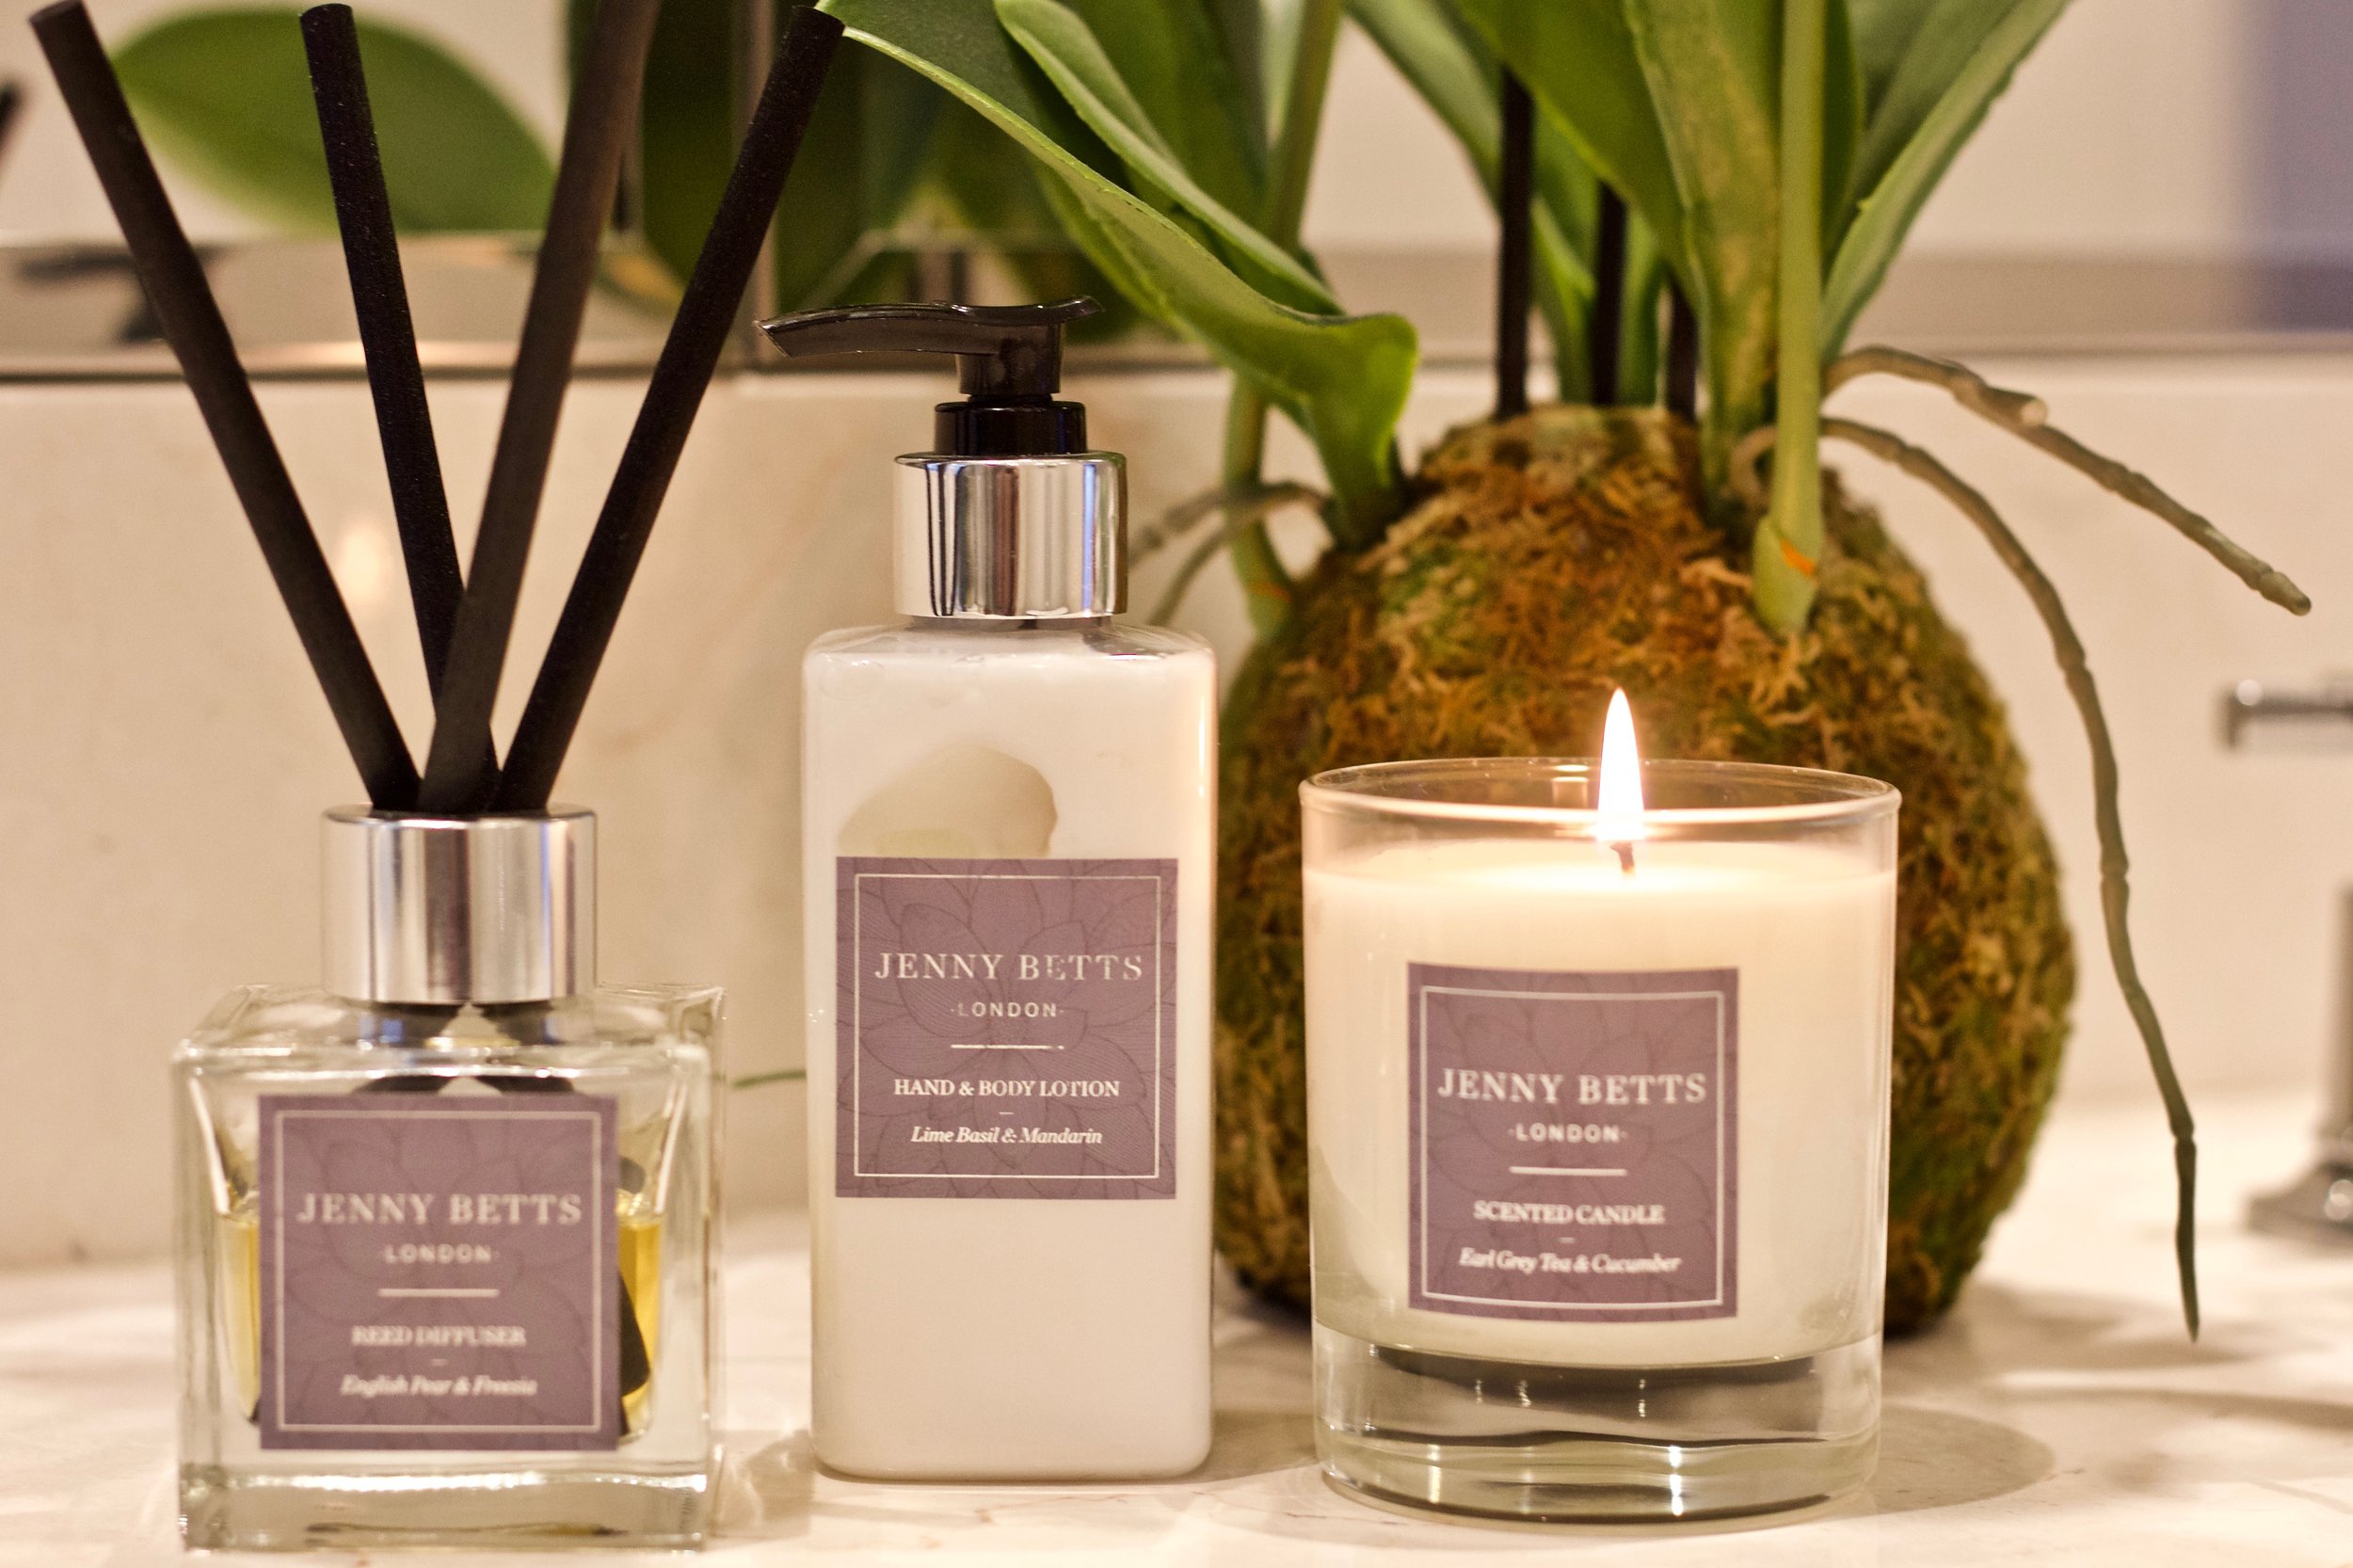 Jenny Betts London fragrances and candles in Battersea South West London 8.jpg